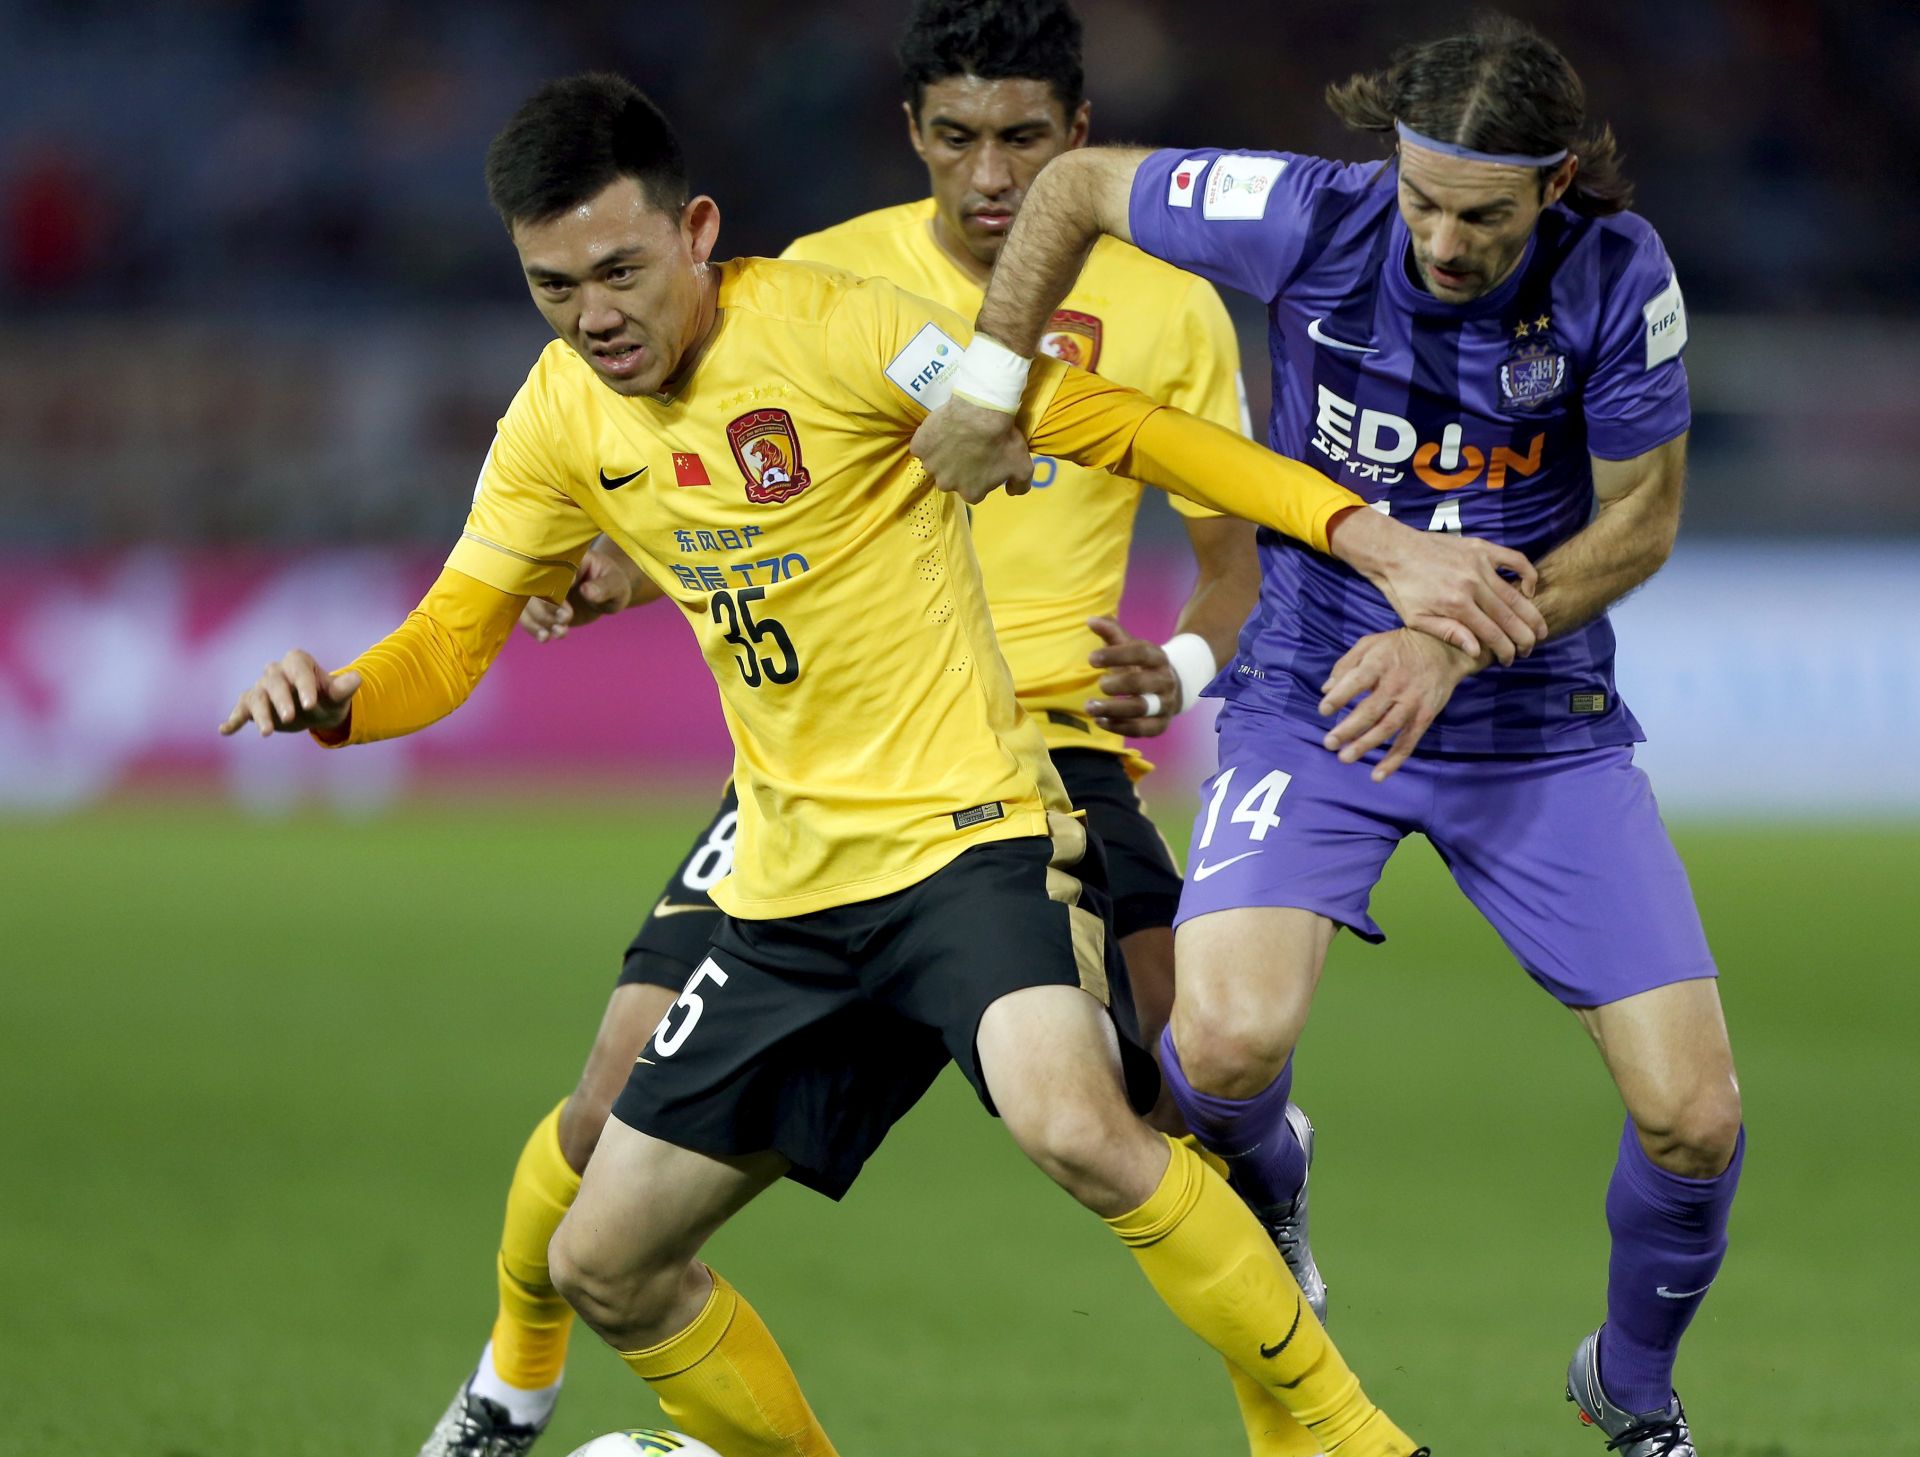 epa05076089 Guangzhou Evergrande FC defender Xuepeng Li (L) in action against Sanfrecce Hiroshima's midfielder Mihael Mikic (R) during the third place match of the FIFA Club World Cup 2015 in Yokohama, south of Tokyo, Japan, 20 December 2015.  EPA/CHRISTOPHER JUE